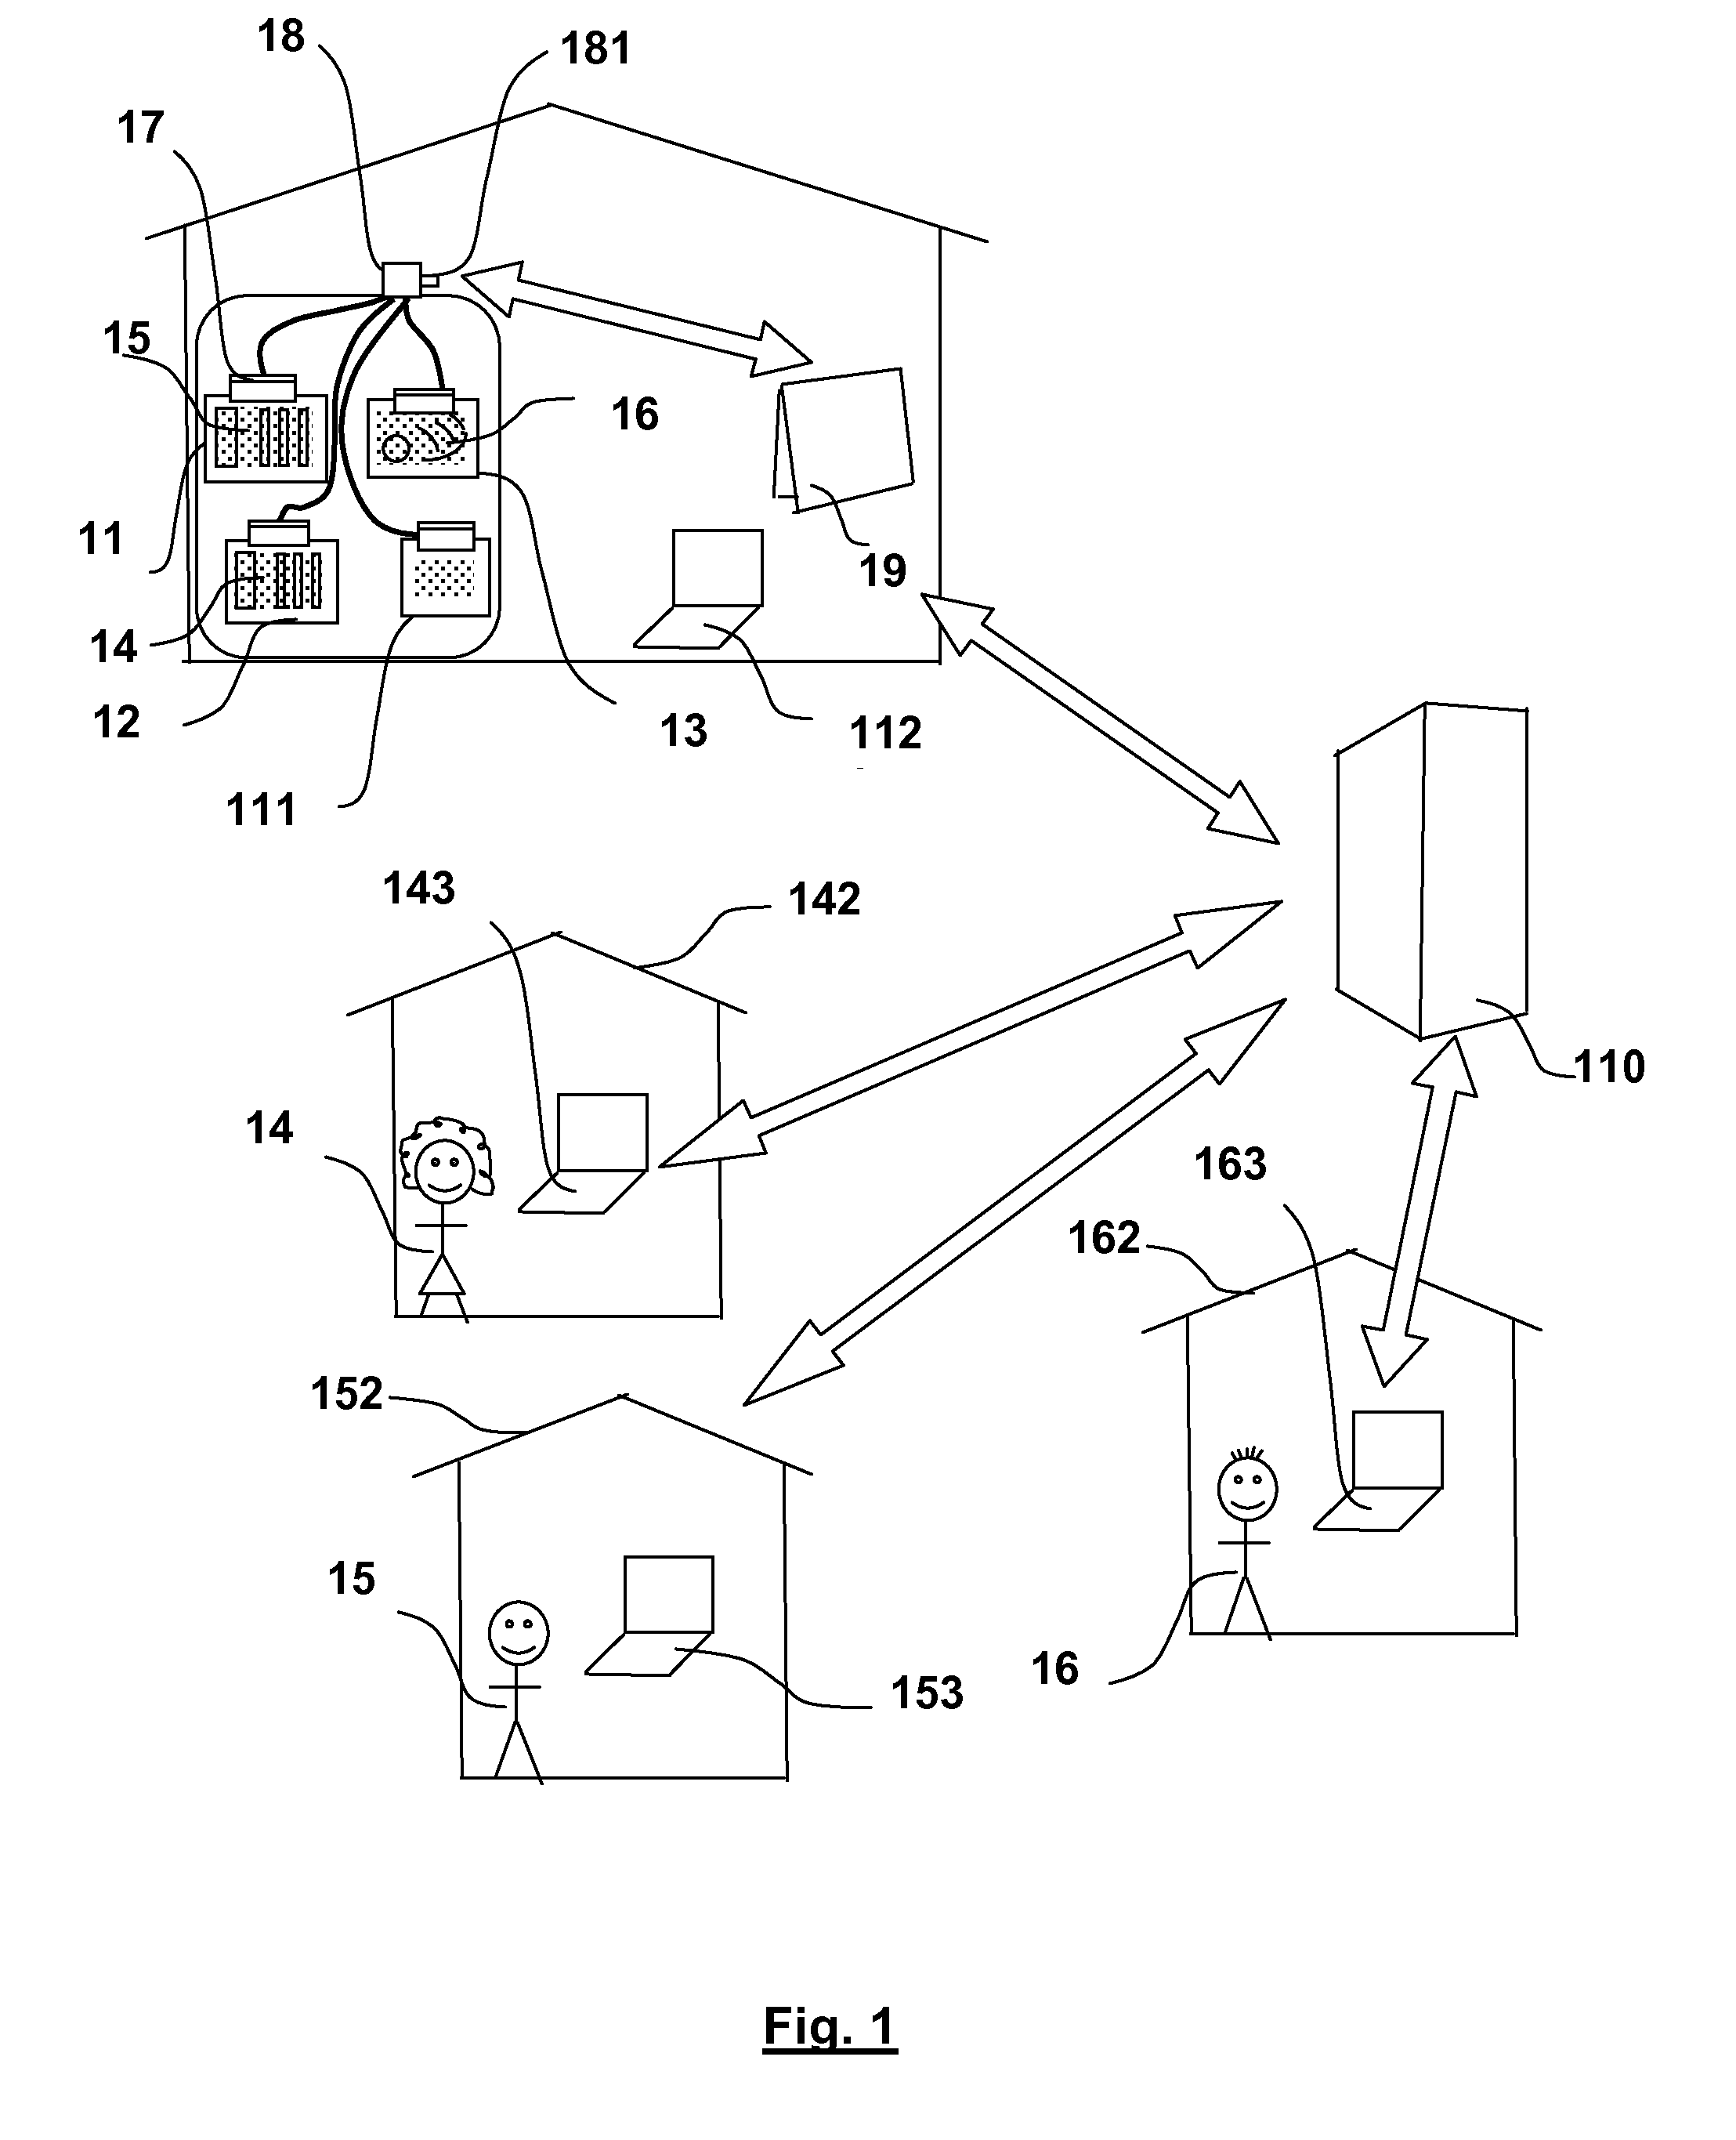 Method for Transmitting Information for a Collective Rendering of Information on Emotions